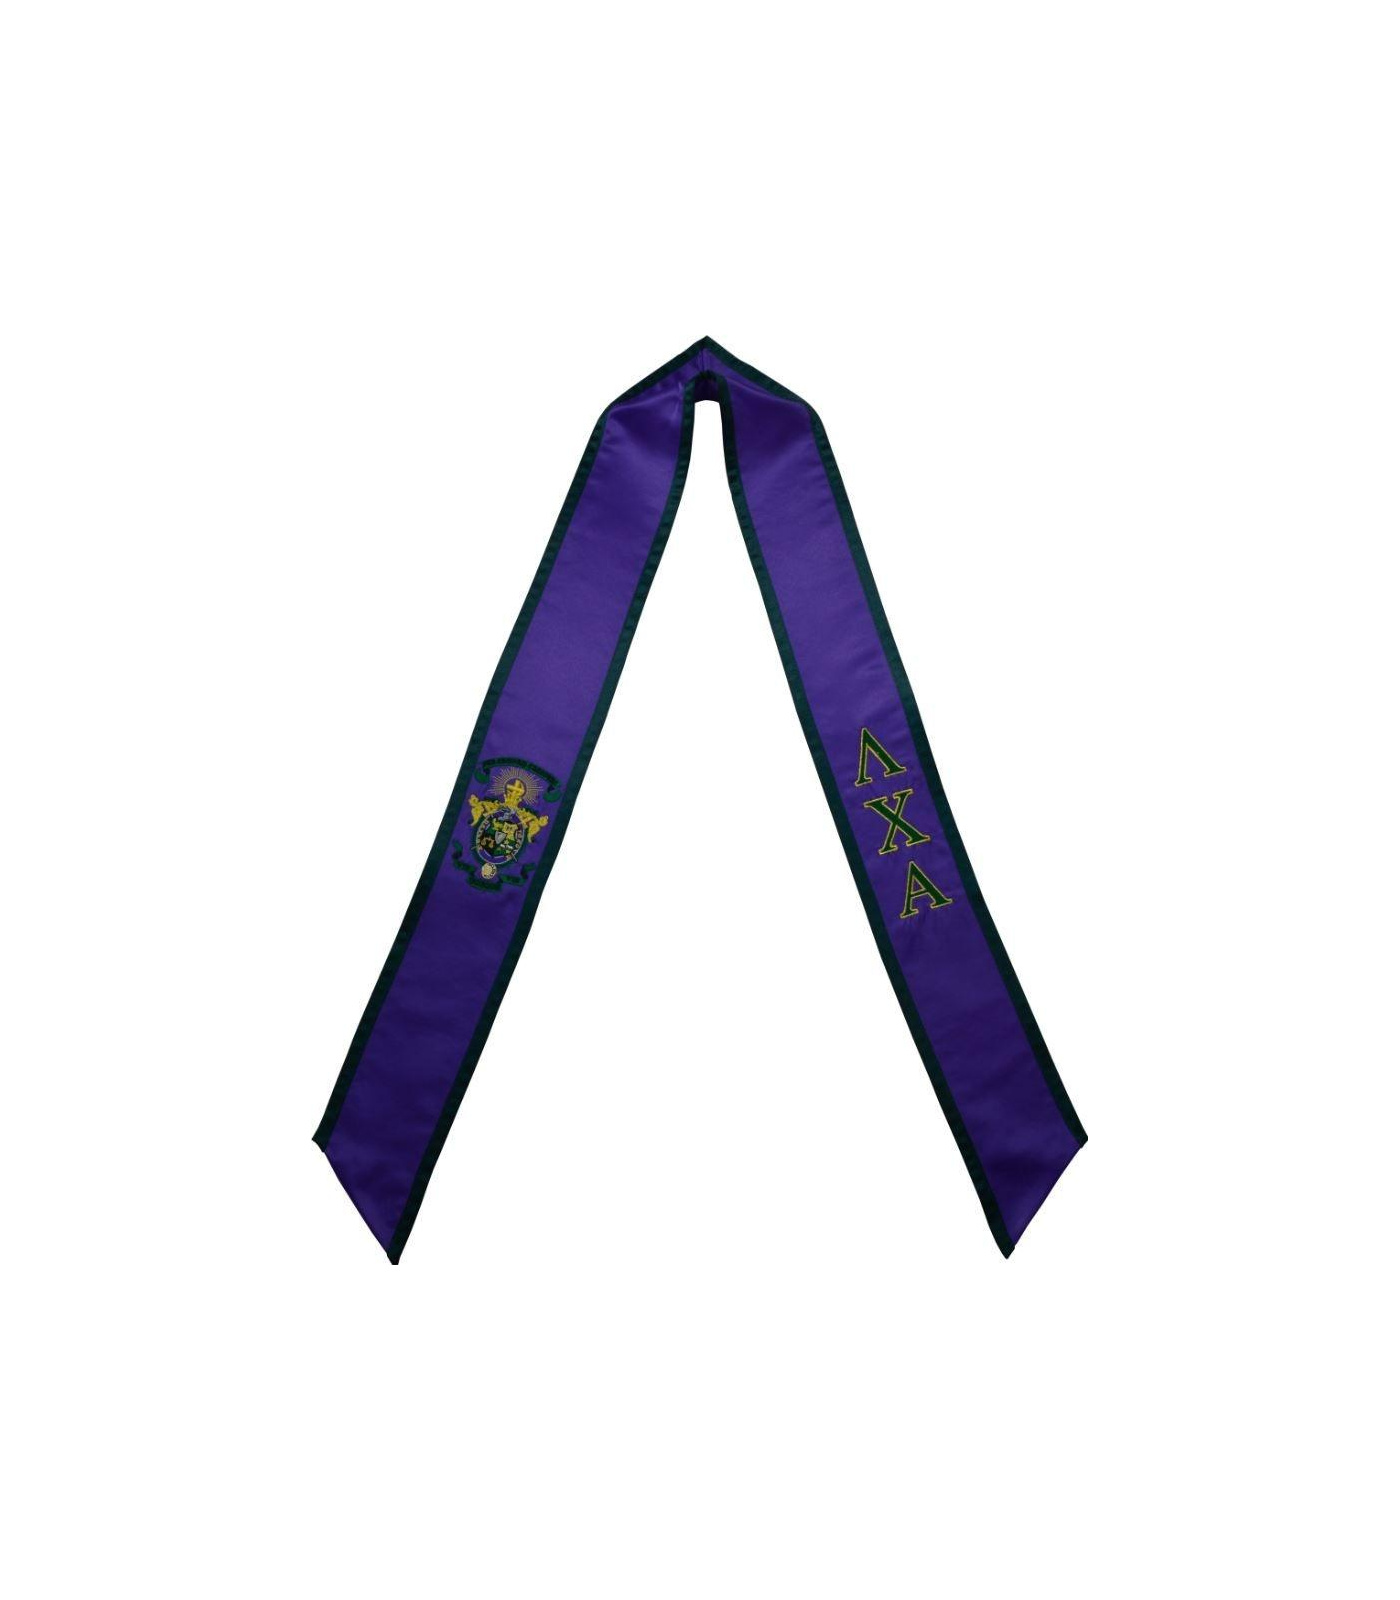 lambda_chi_alpha_edited_for_site_and_amazon_2